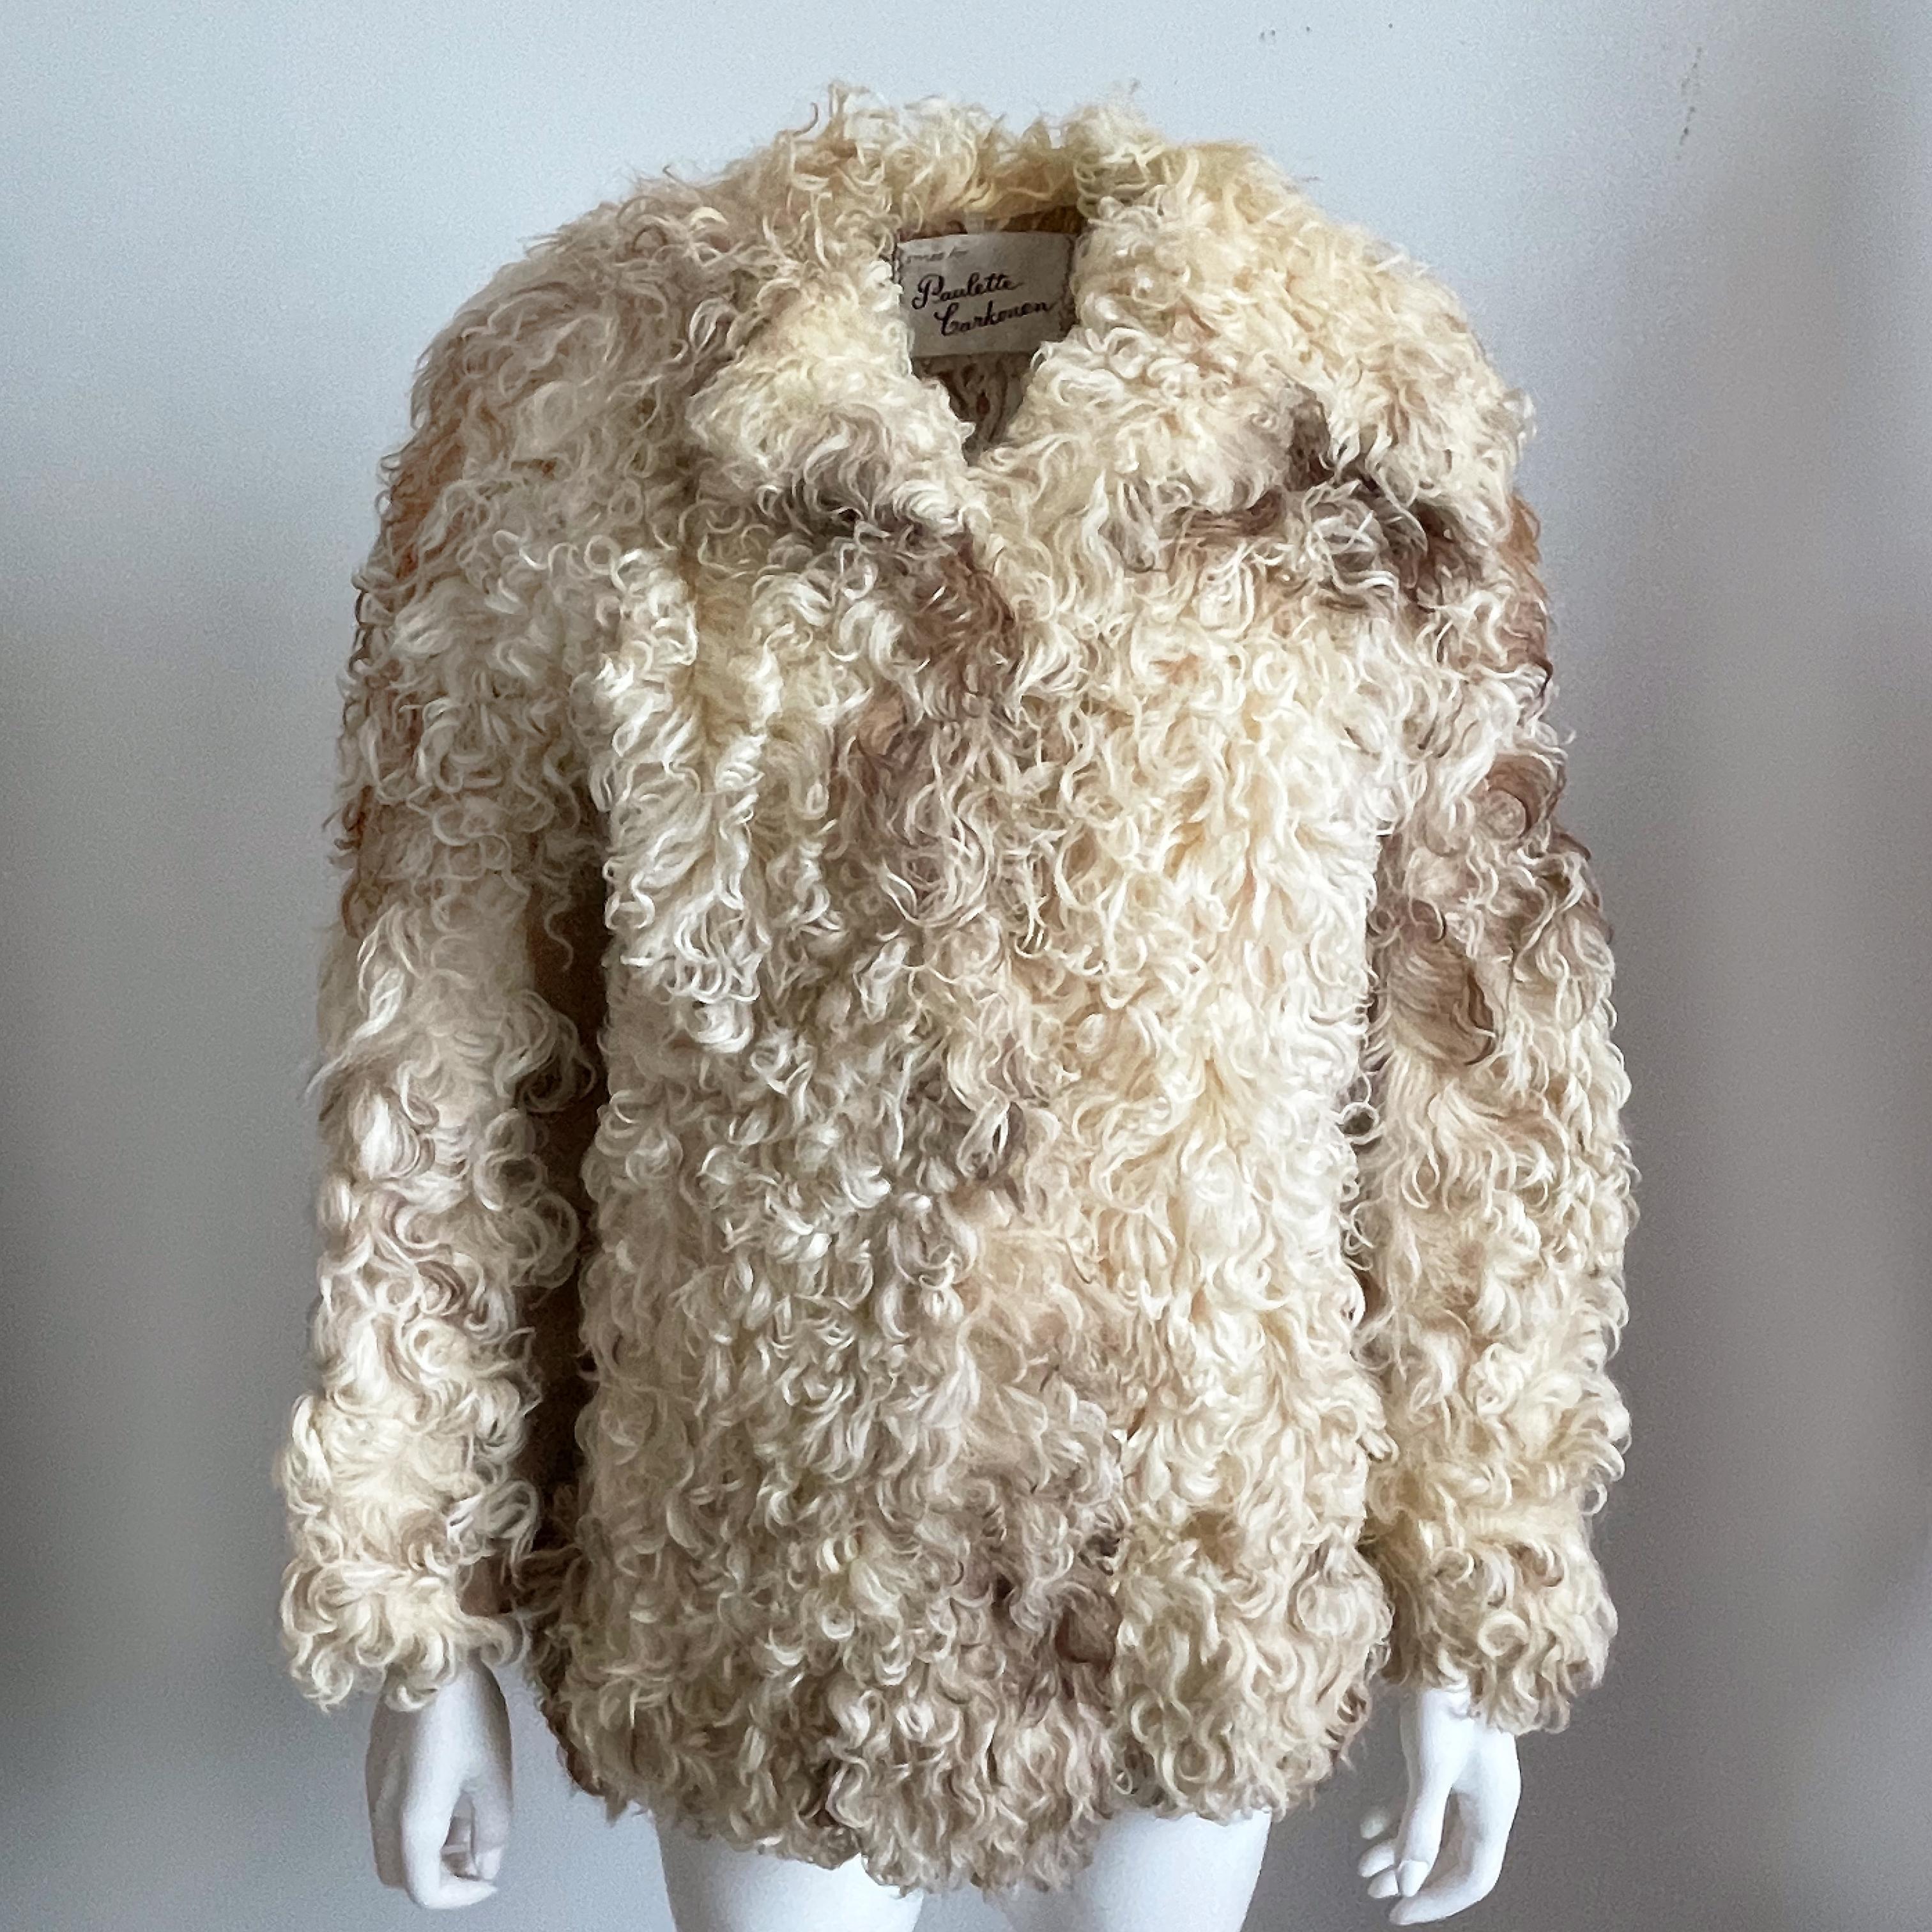 Preowned/vintage Donald Brooks Mongolian lamb fur jacket with suede leather panels, likely made in the 70s.  Fastens with hidden buttons/fully-lined/furrier & leather clean only/collar can be worn up or down.  

A gorgeous curly lamb and suede